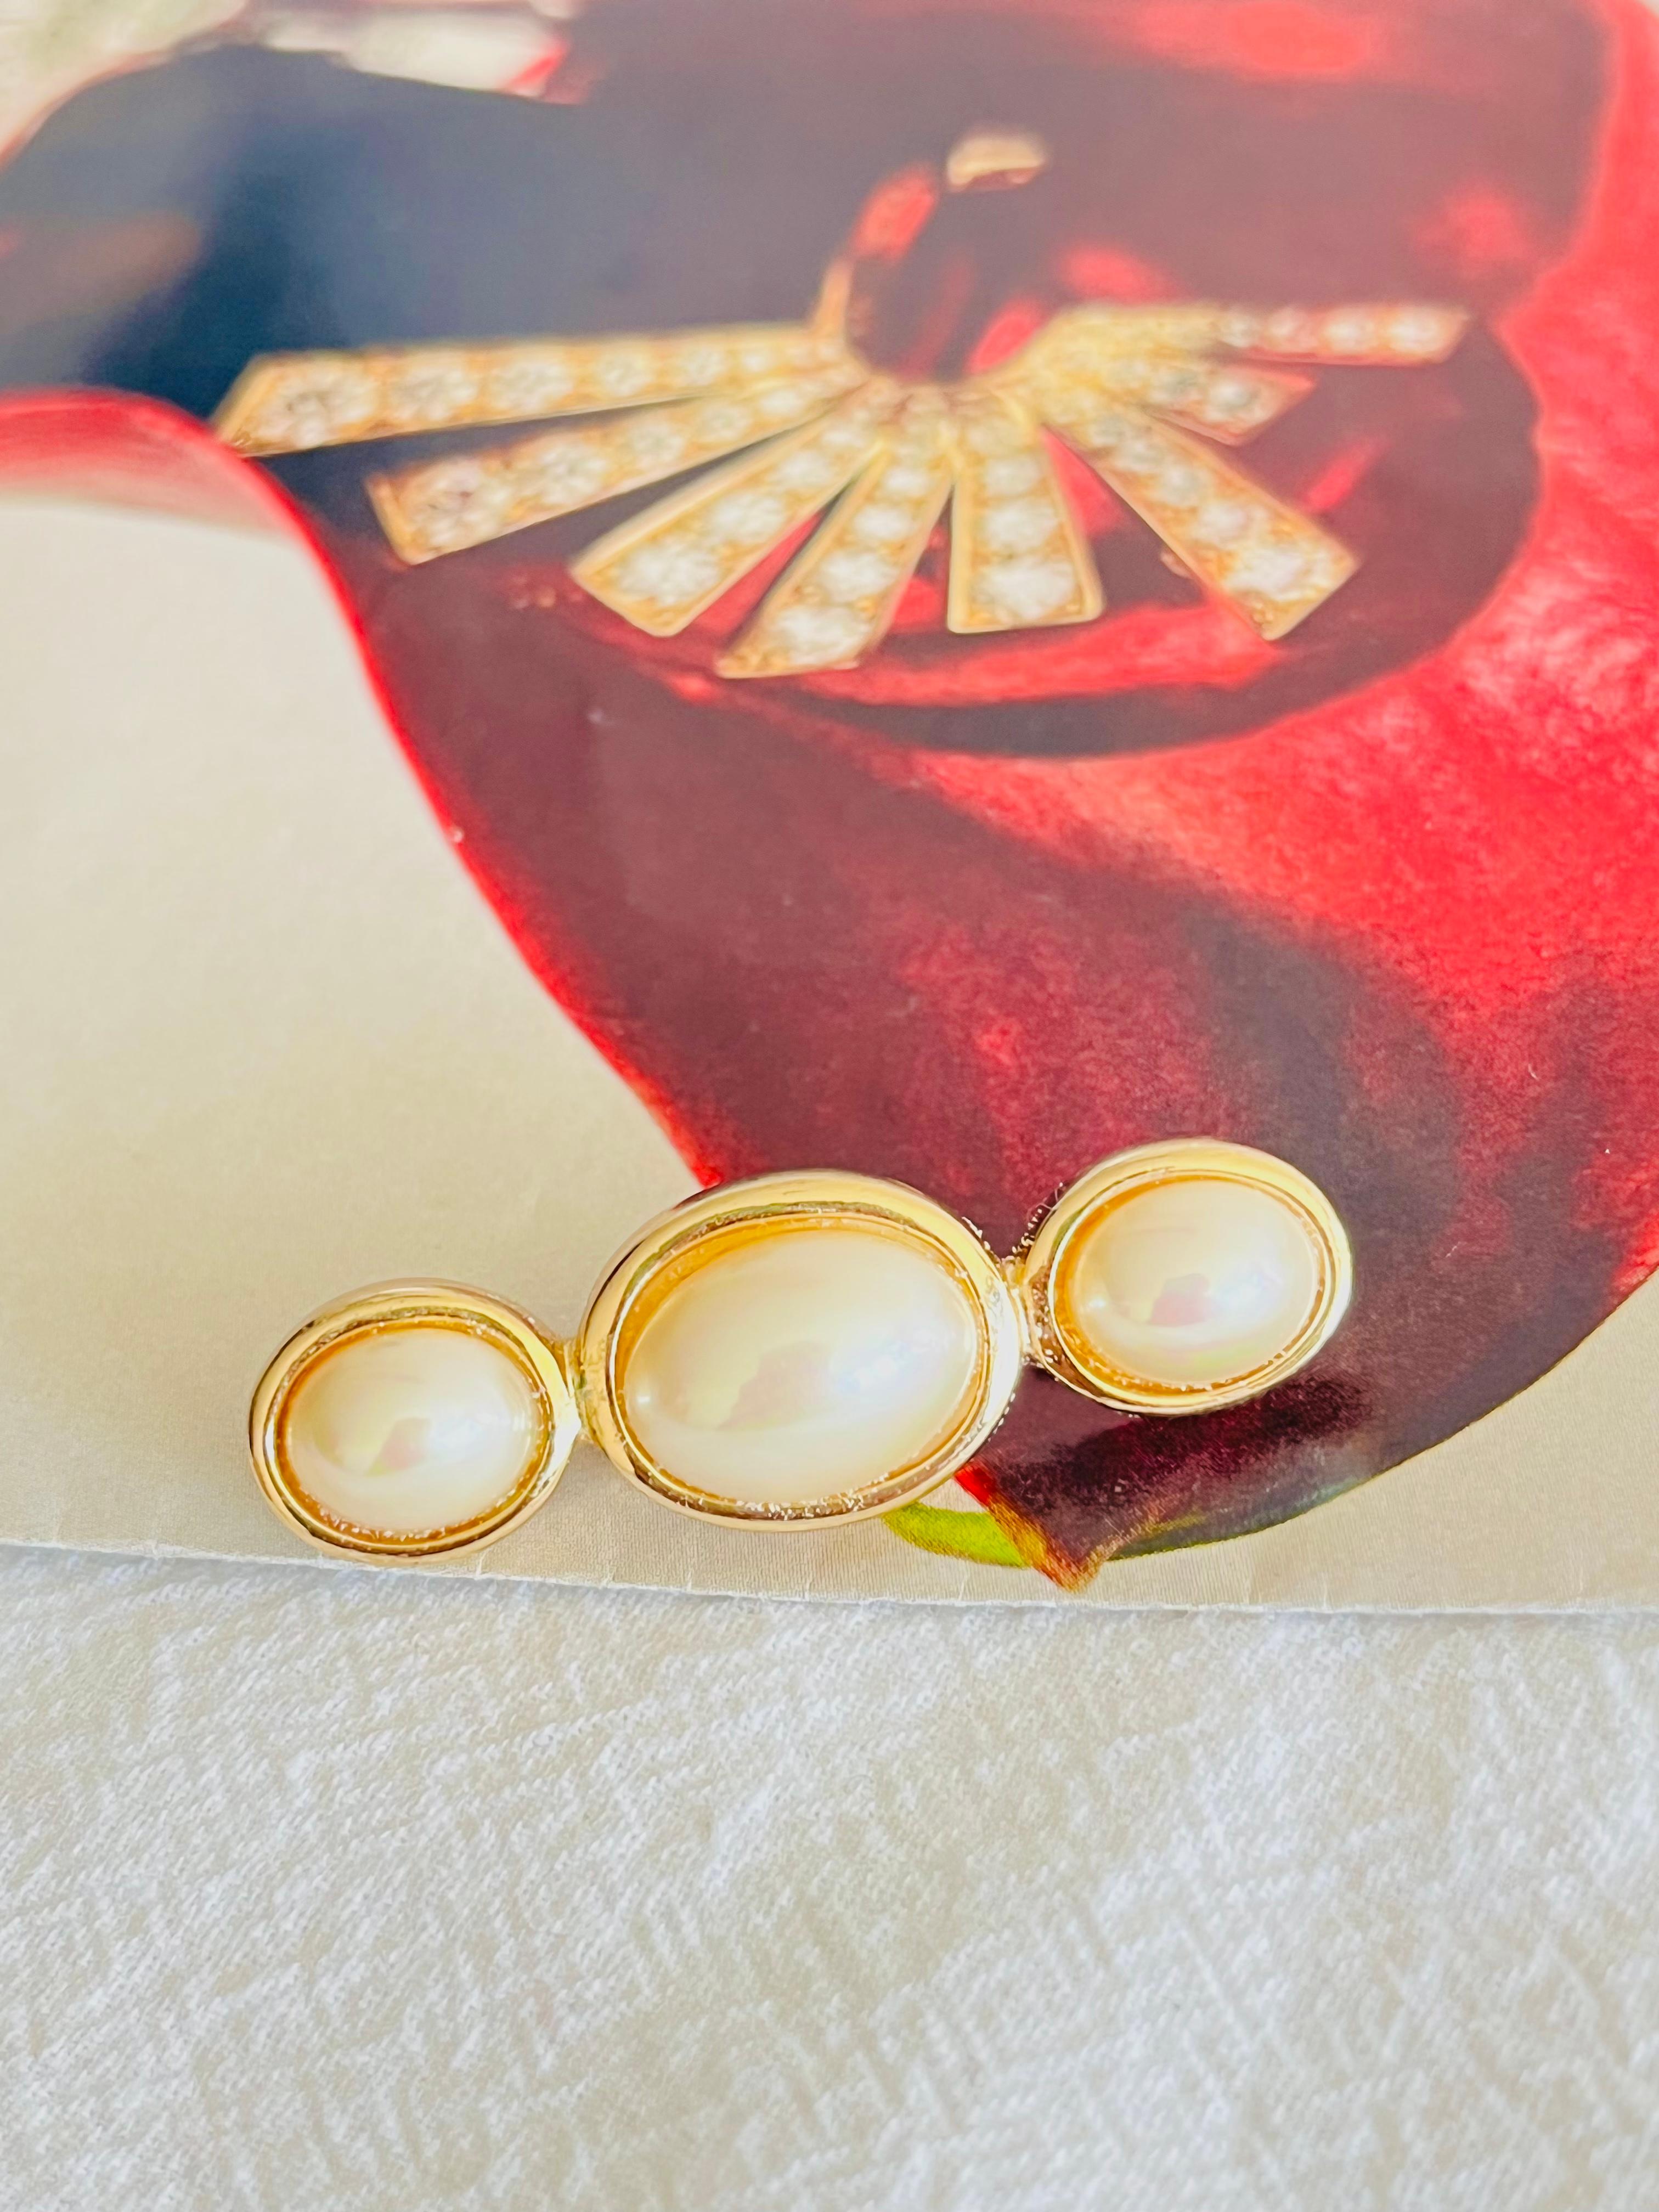 Very good condition. 100% Genuine.

A unique piece. This gold plated stylised brooch with three gorgeous faux pearls. 

Safety-catch pin closure, signed Christian Dior on the back.

Size: 4.4 cm x 1.5 cm.

Weight: 7.0 g.

_ _ _

Great for everyday